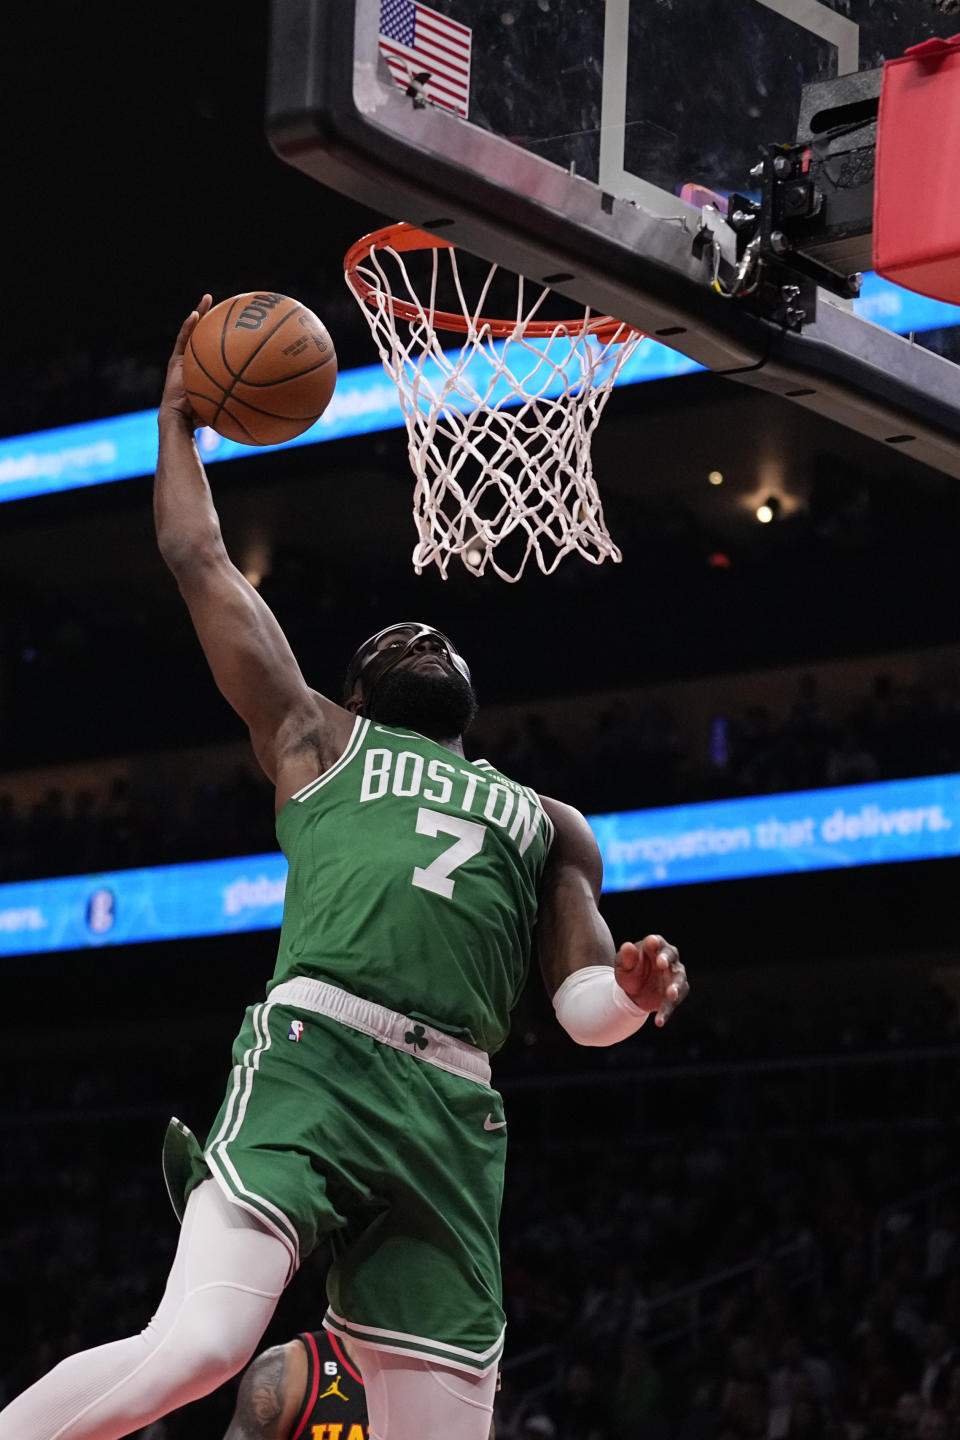 Boston Celtics guard Jaylen Brown (7) shoots and scores against the Atlanta Hawks during the second half of Game 3 of a first-round NBA basketball playoff series, Friday, April 21, 2023, in Atlanta. (AP Photo/Brynn Anderson)